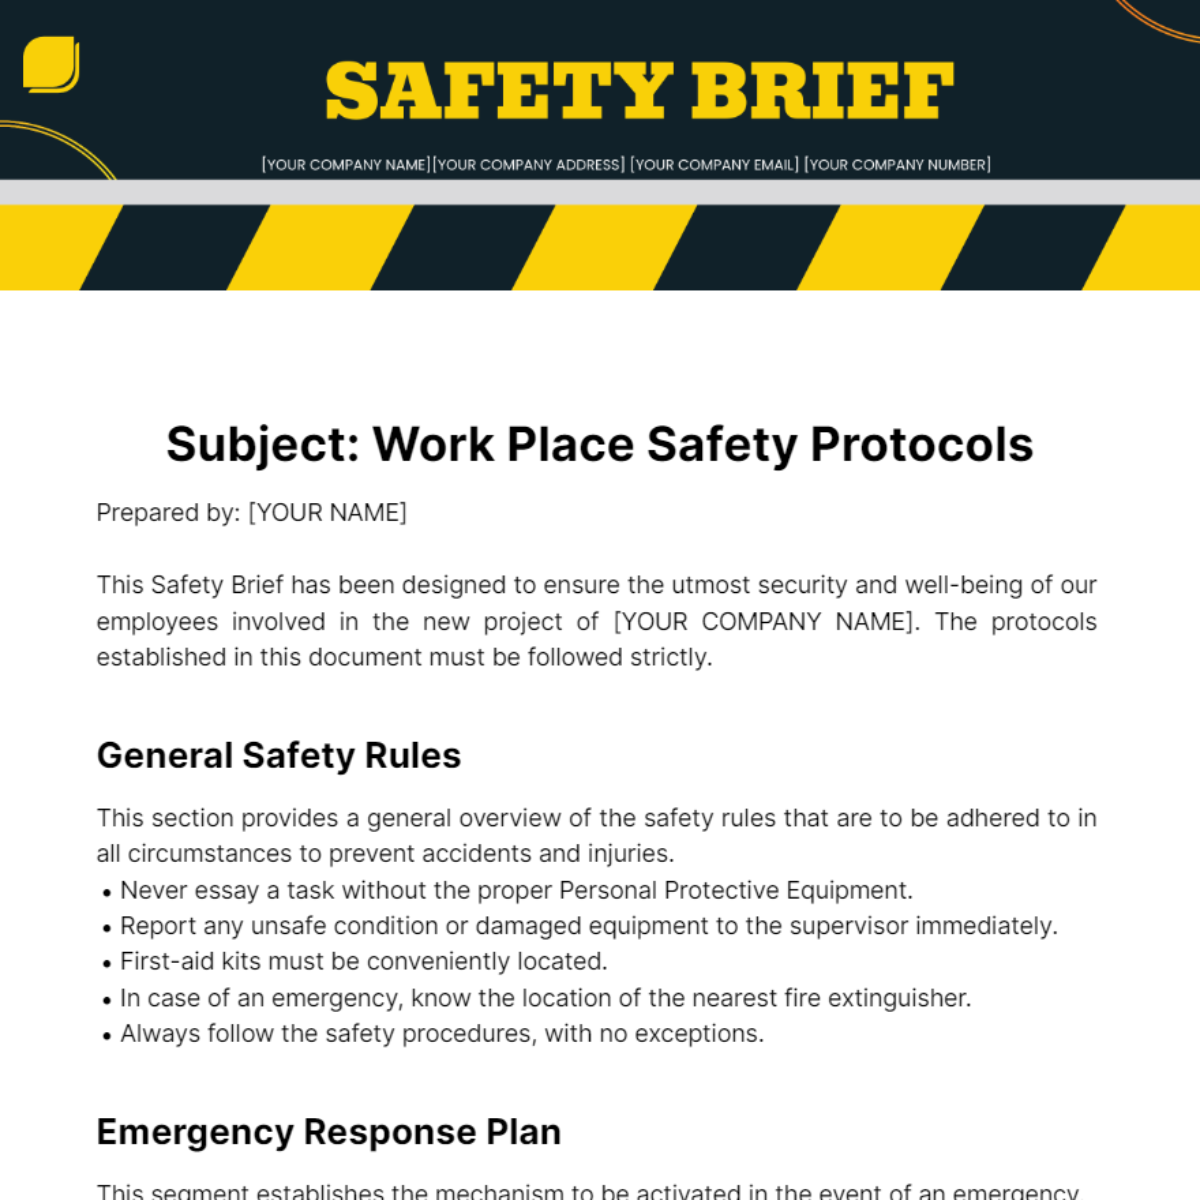 Safety Brief Template - Edit Online & Download Example